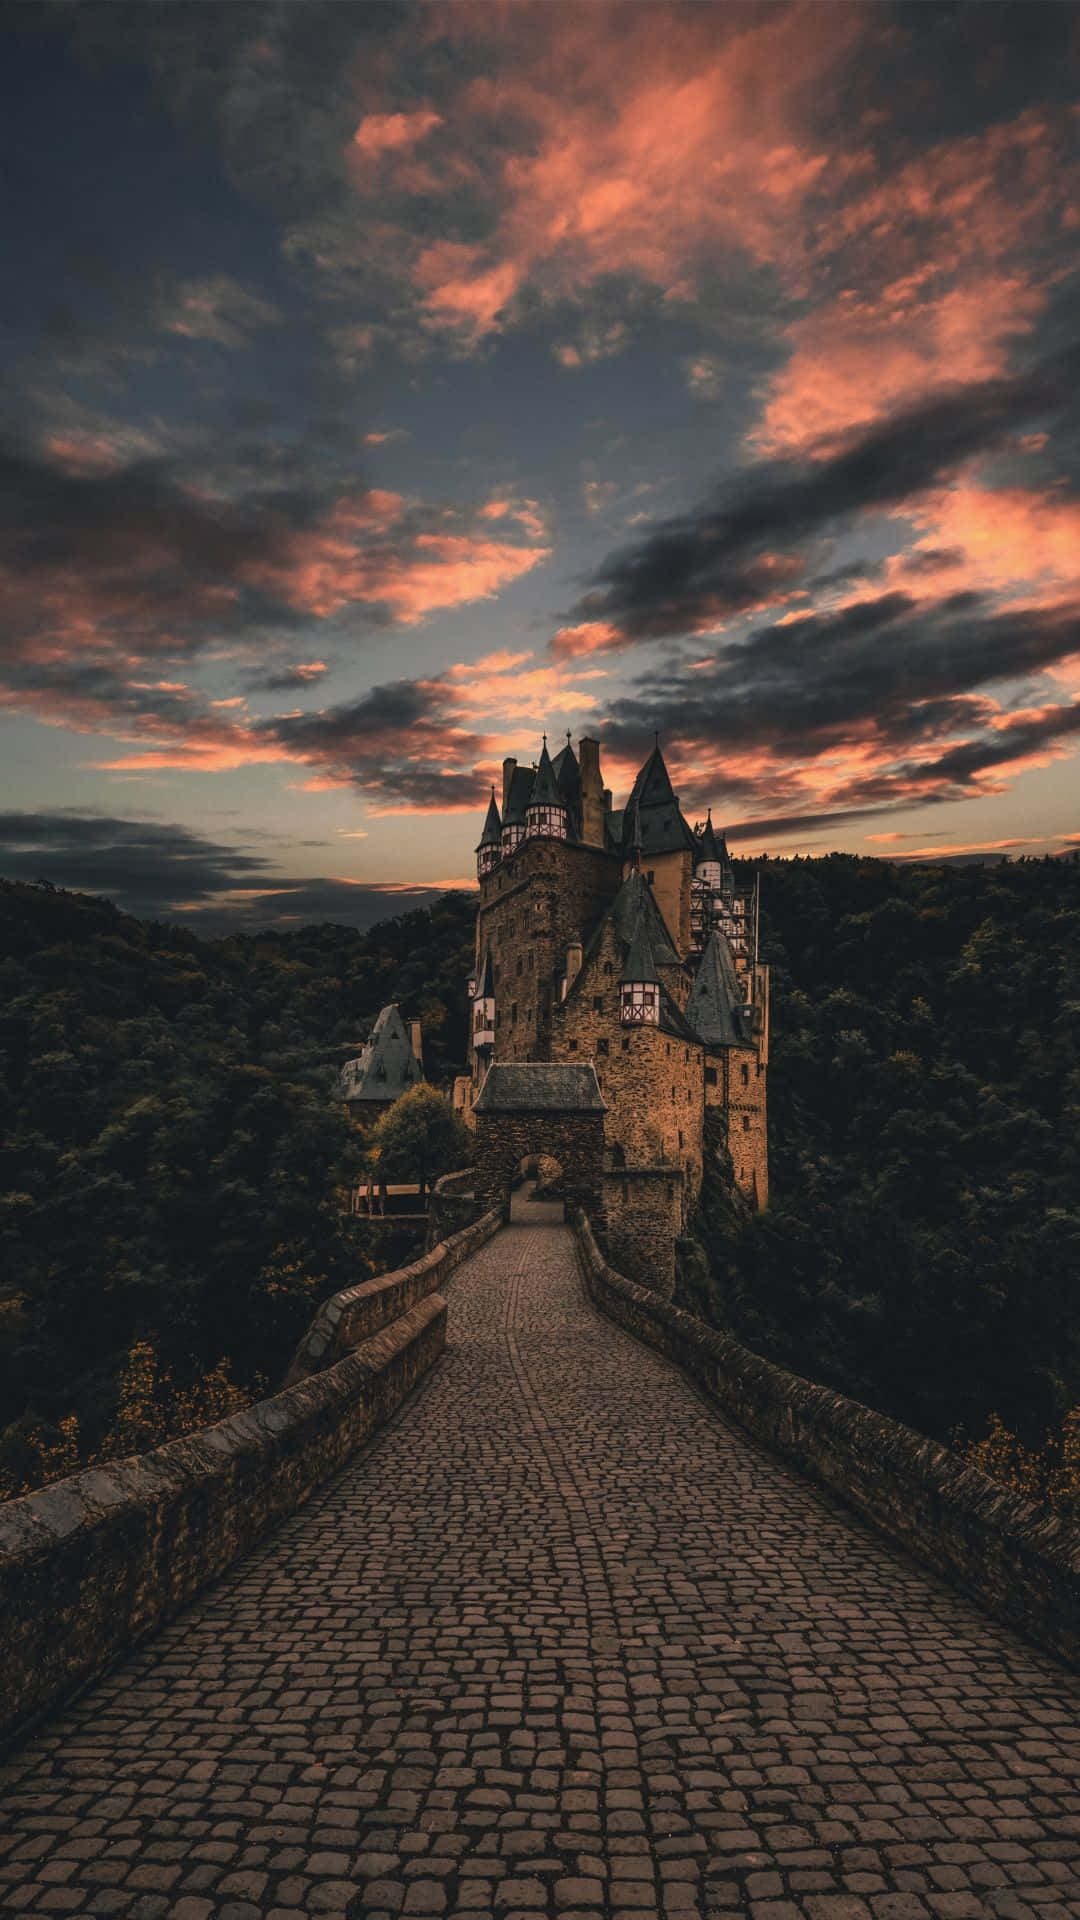 A breathtaking view of a castle in the middle of a grand landscape Wallpaper